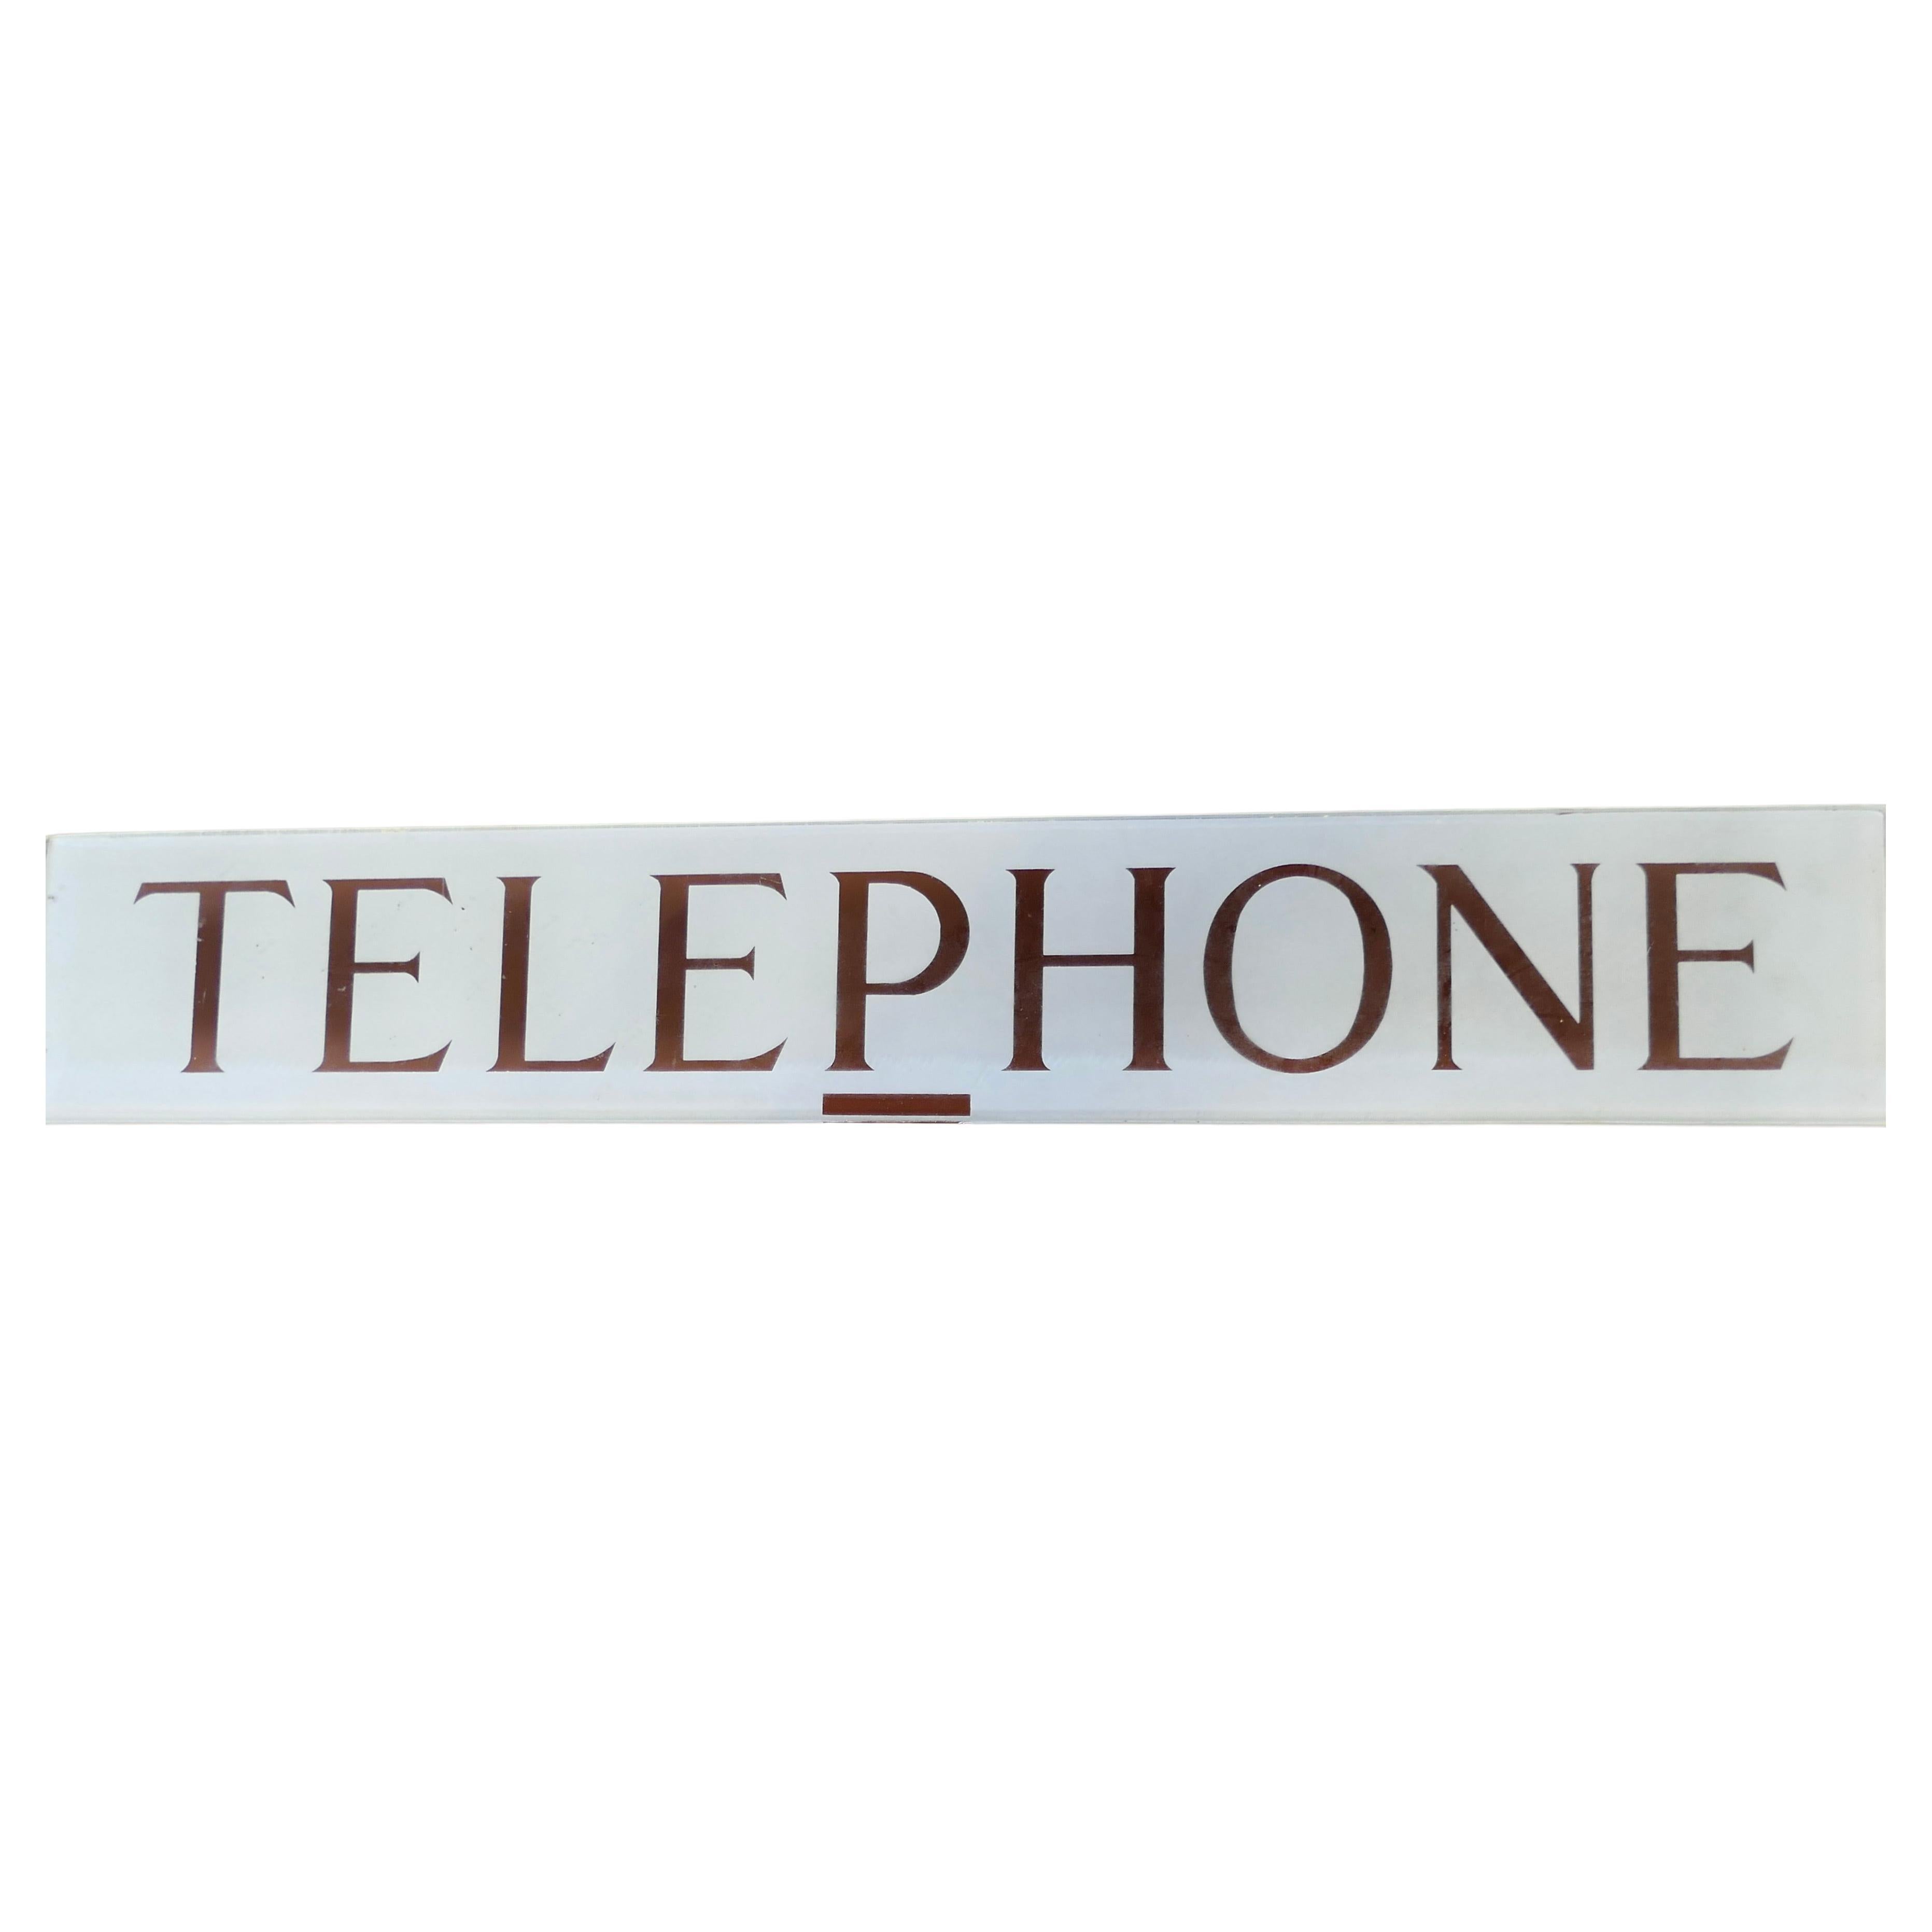 Original GPO Glass “TELEPHONE” sign from a Red Phone Box  From the 1950s   For Sale